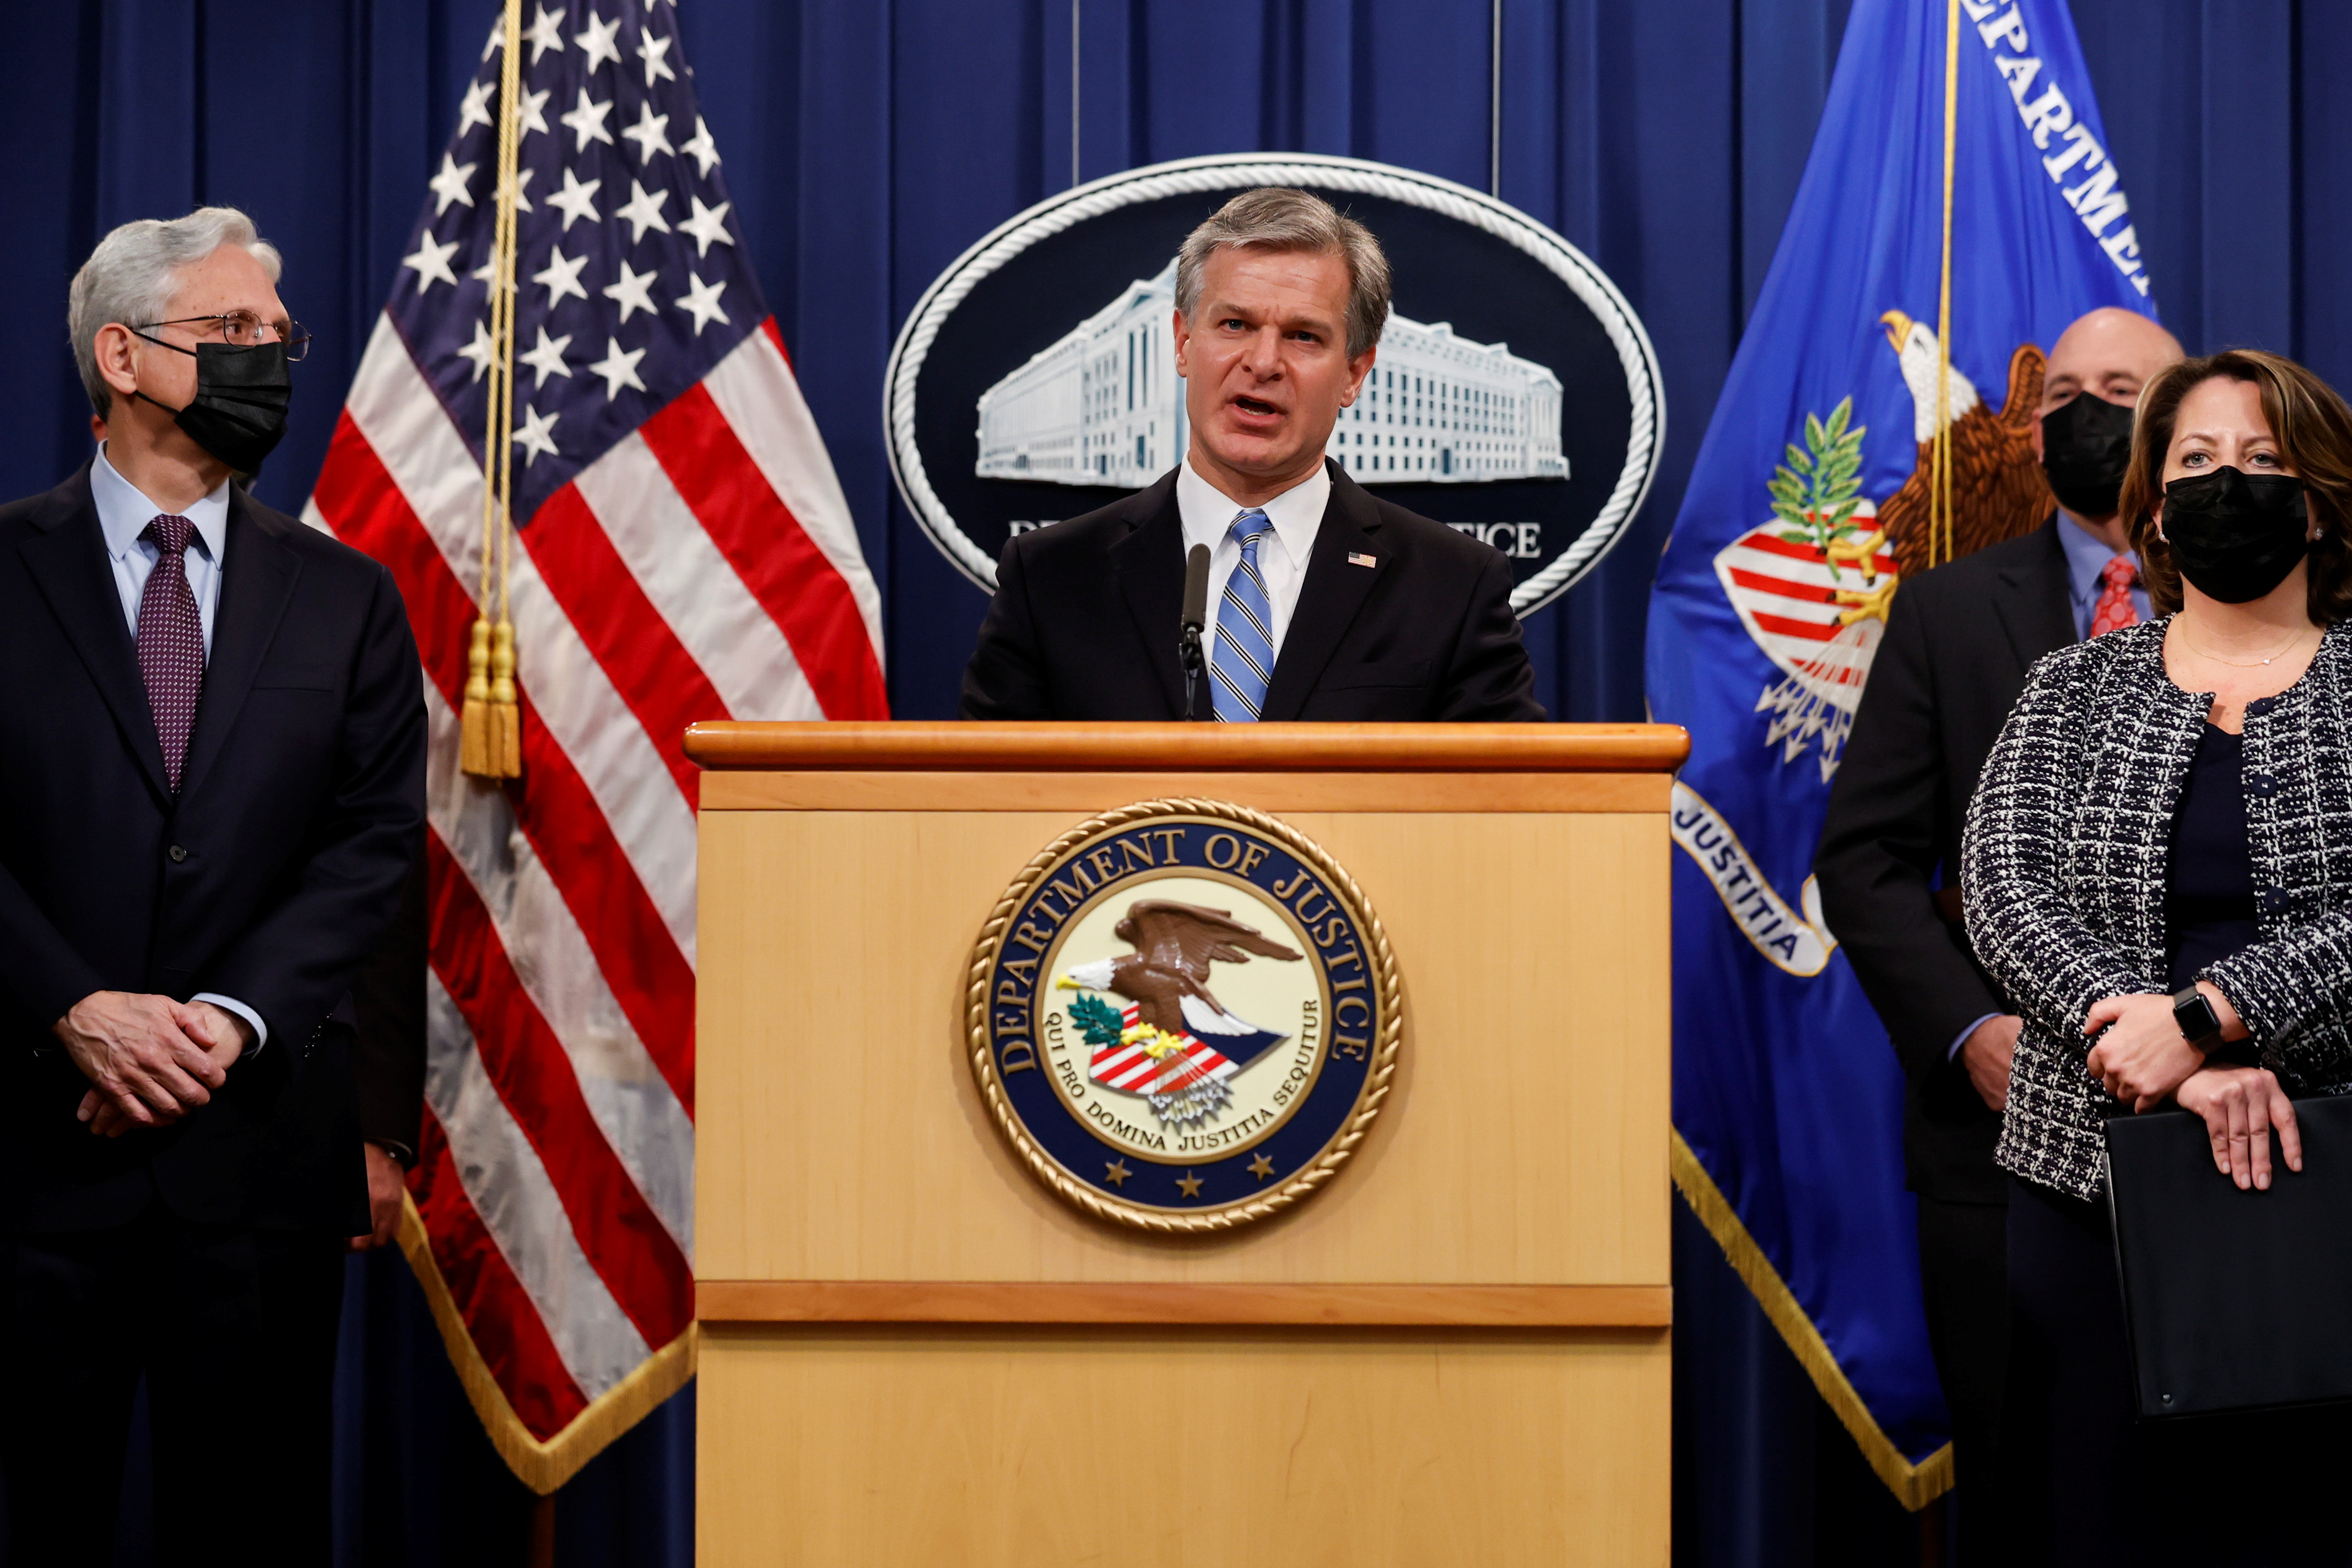 FBI Director Christopher Wray is flanked by U.S. Attorney General Merrick Garland and Deputy Attorney General Lisa Monaco as they discuss charges against a suspect from Ukraine and a Russian national over a July ransomware attack on an American company, during a news conference at the Justice Department in Washington, U.S., November 8, 2021. REUTERS/Jonathan Ernst